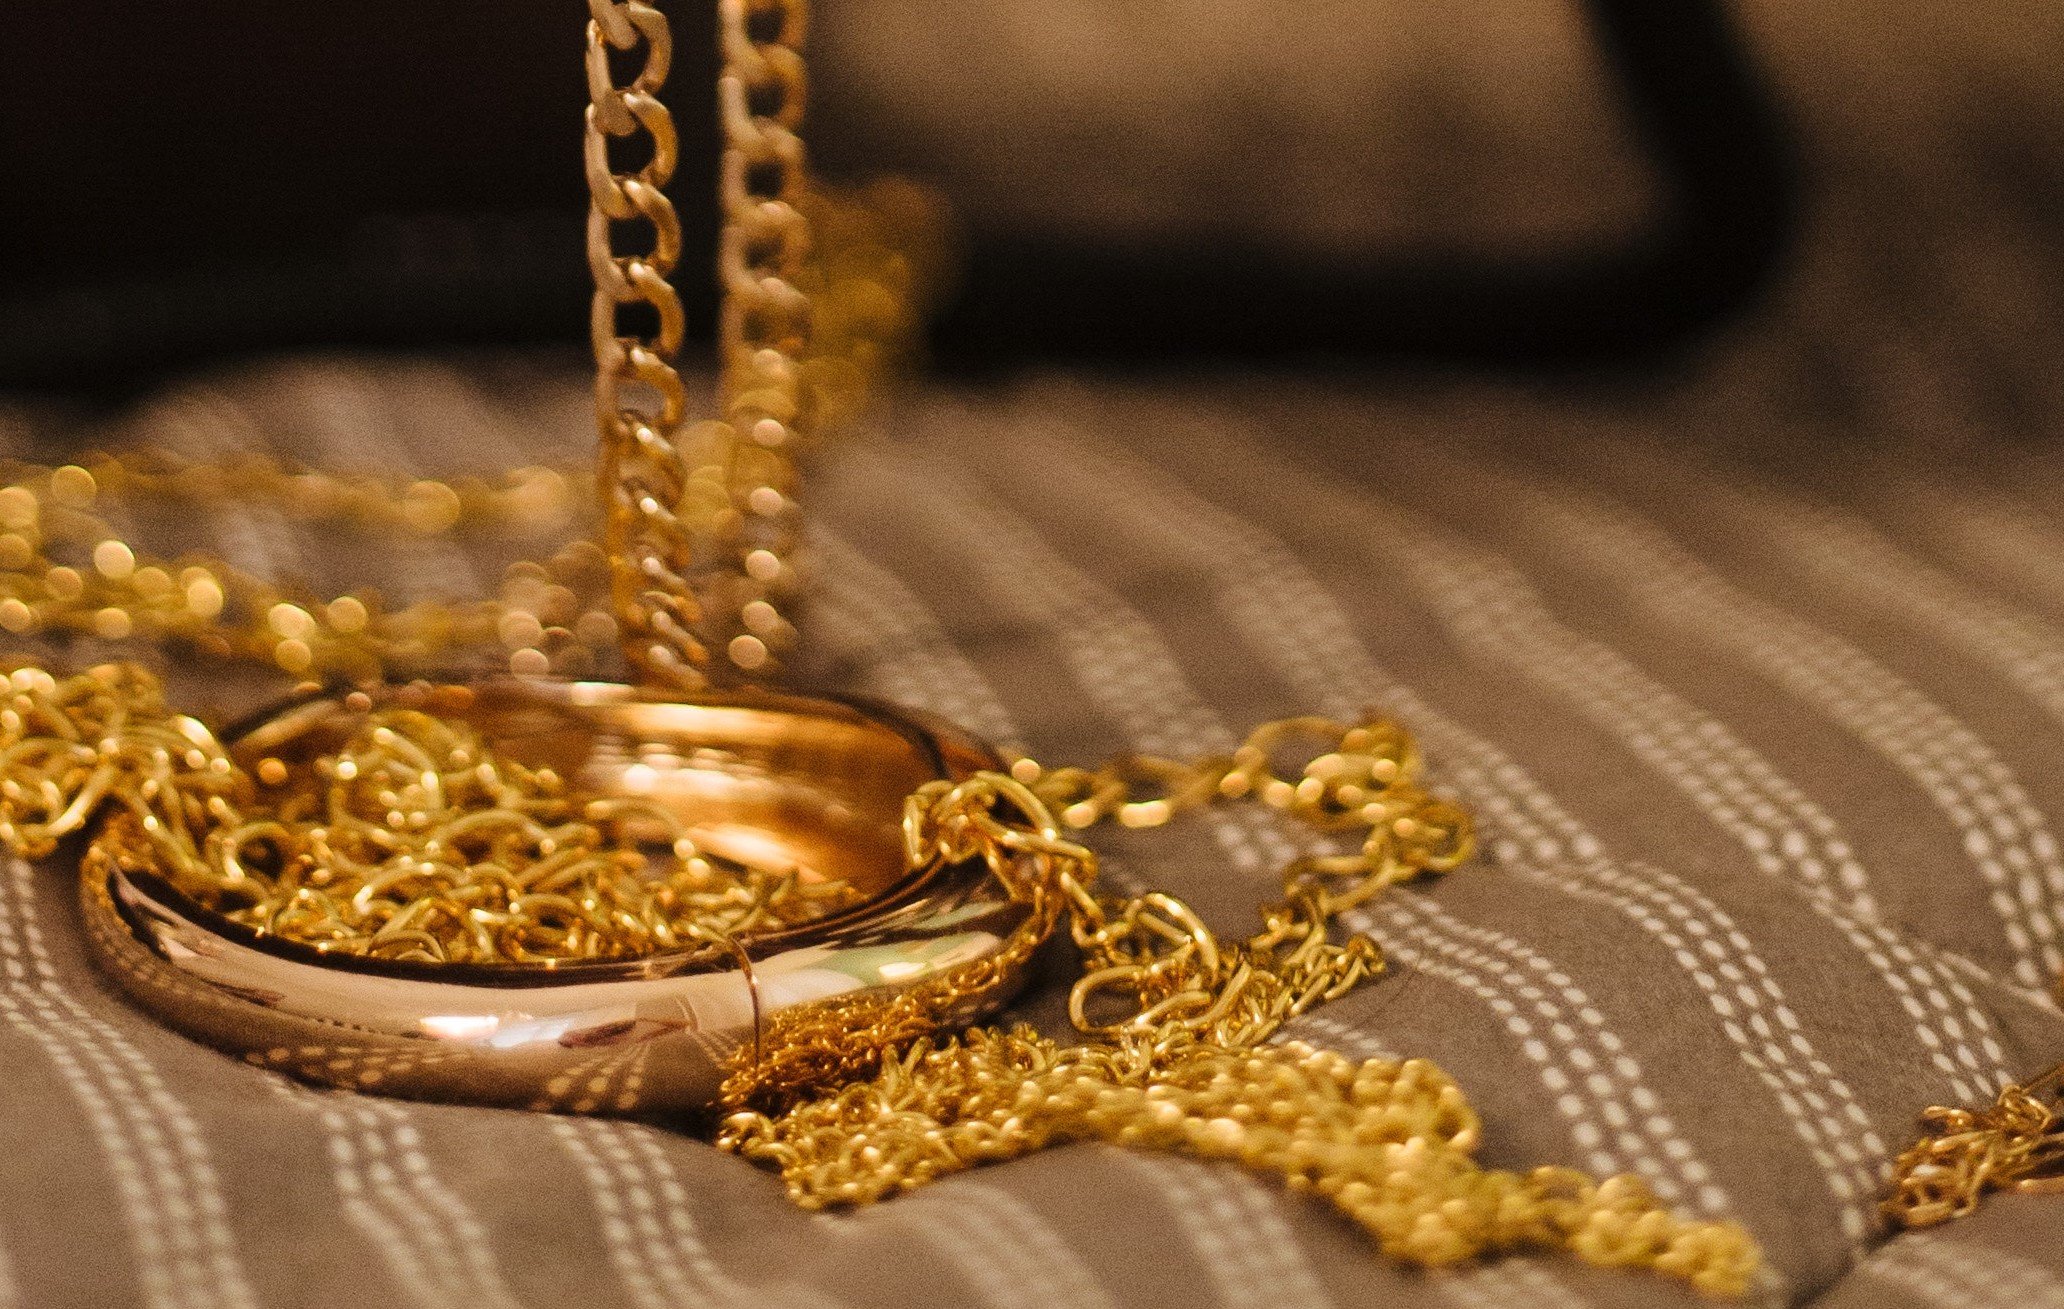 After rummaging through her mom's jewelry box, OP took a gold bracelet. | Source: Pexels